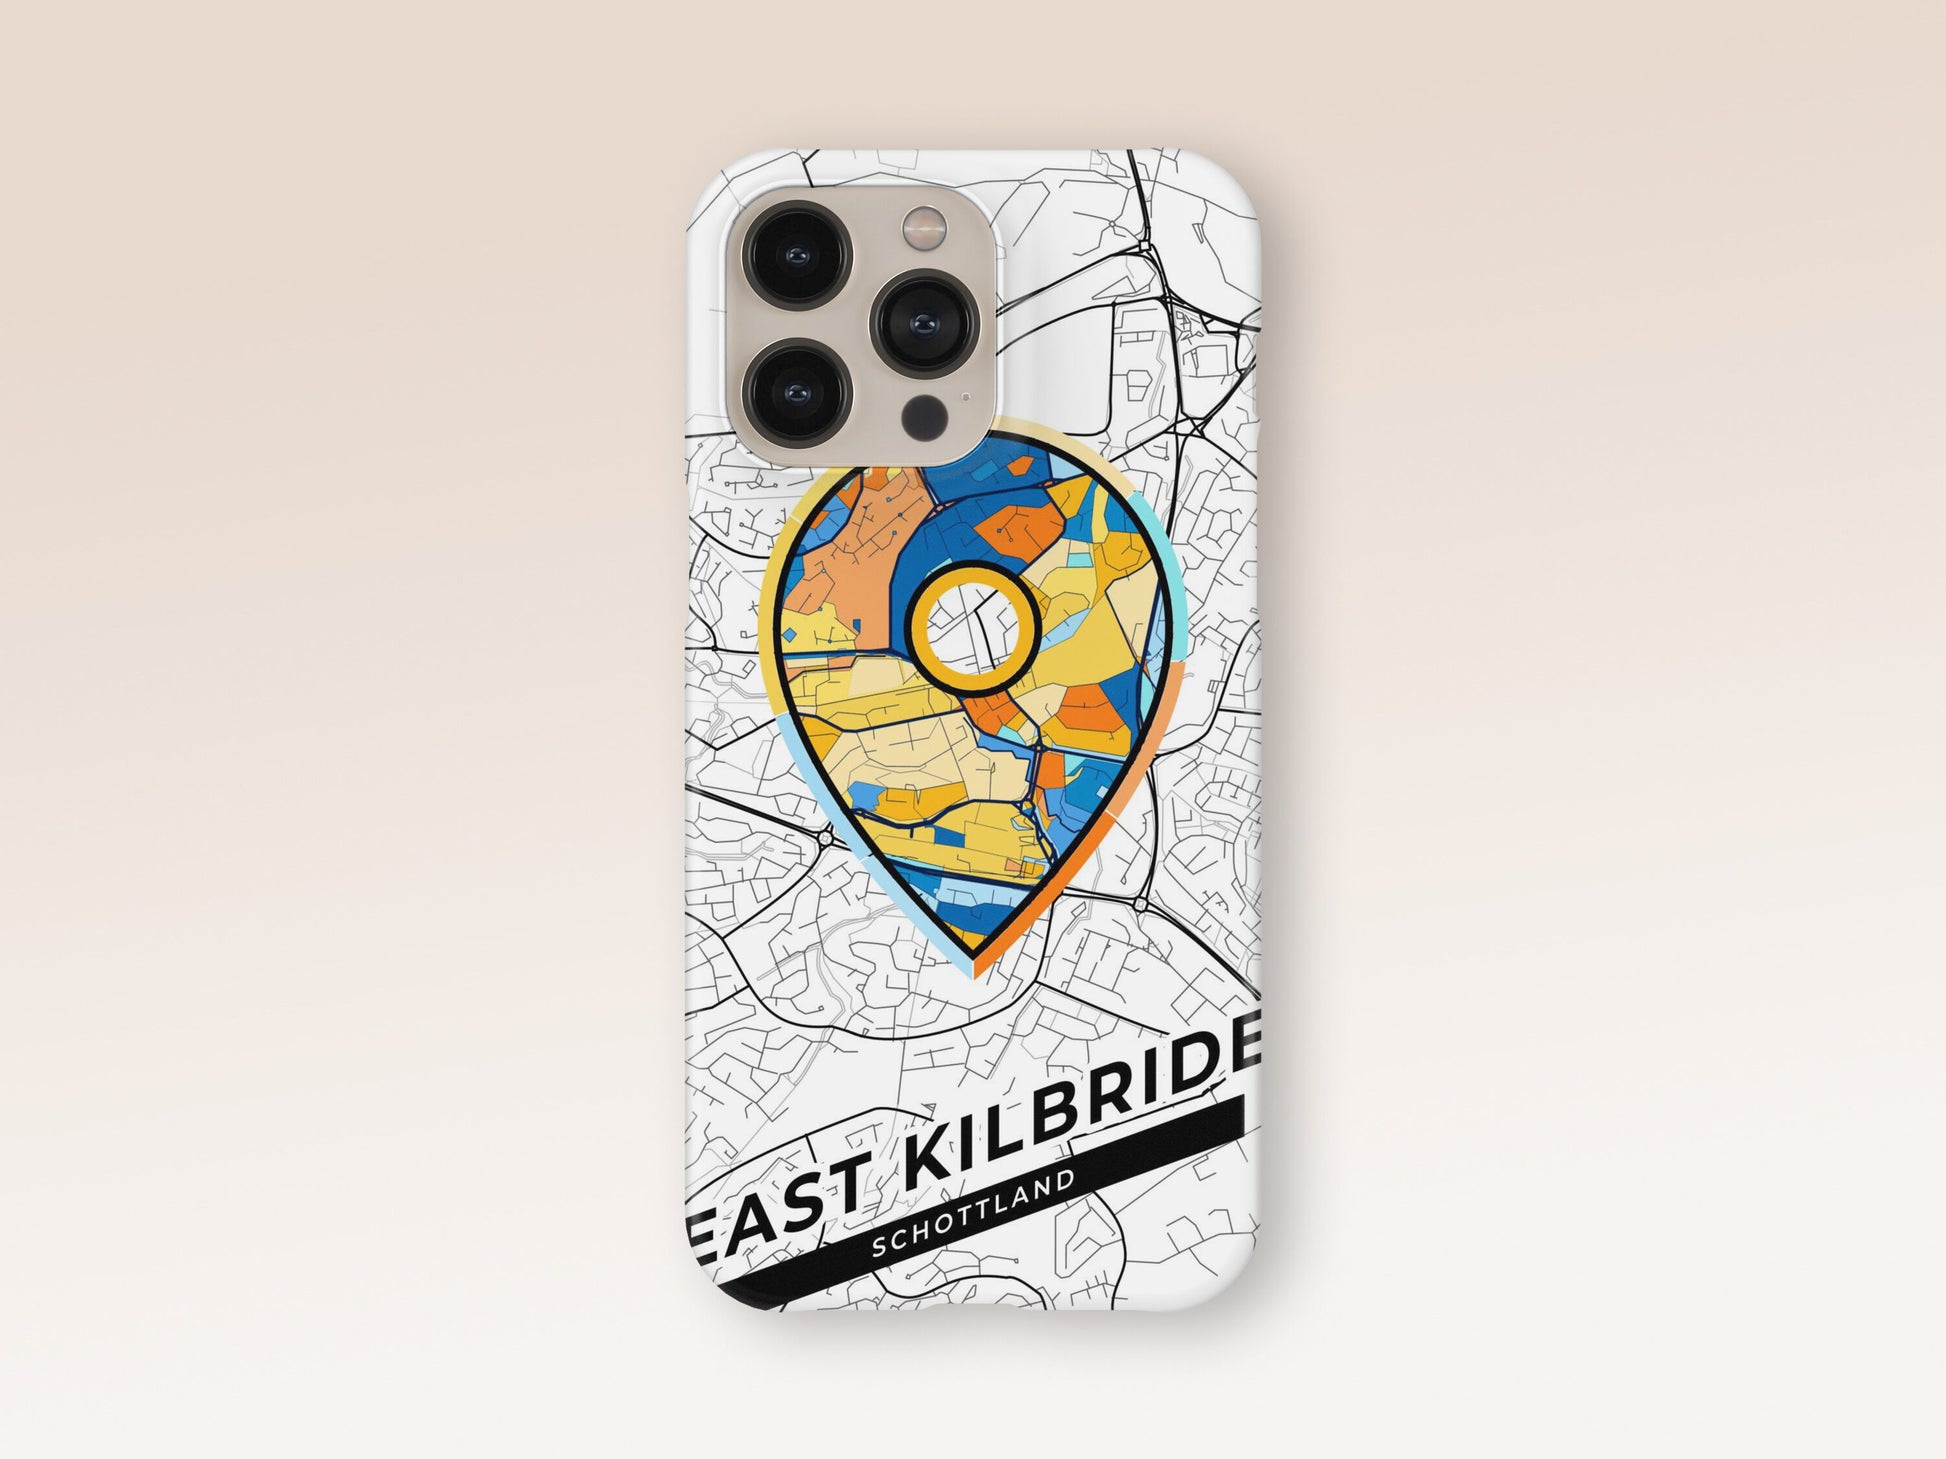 East Kilbride Scotland slim phone case with colorful icon. Birthday, wedding or housewarming gift. Couple match cases. 1